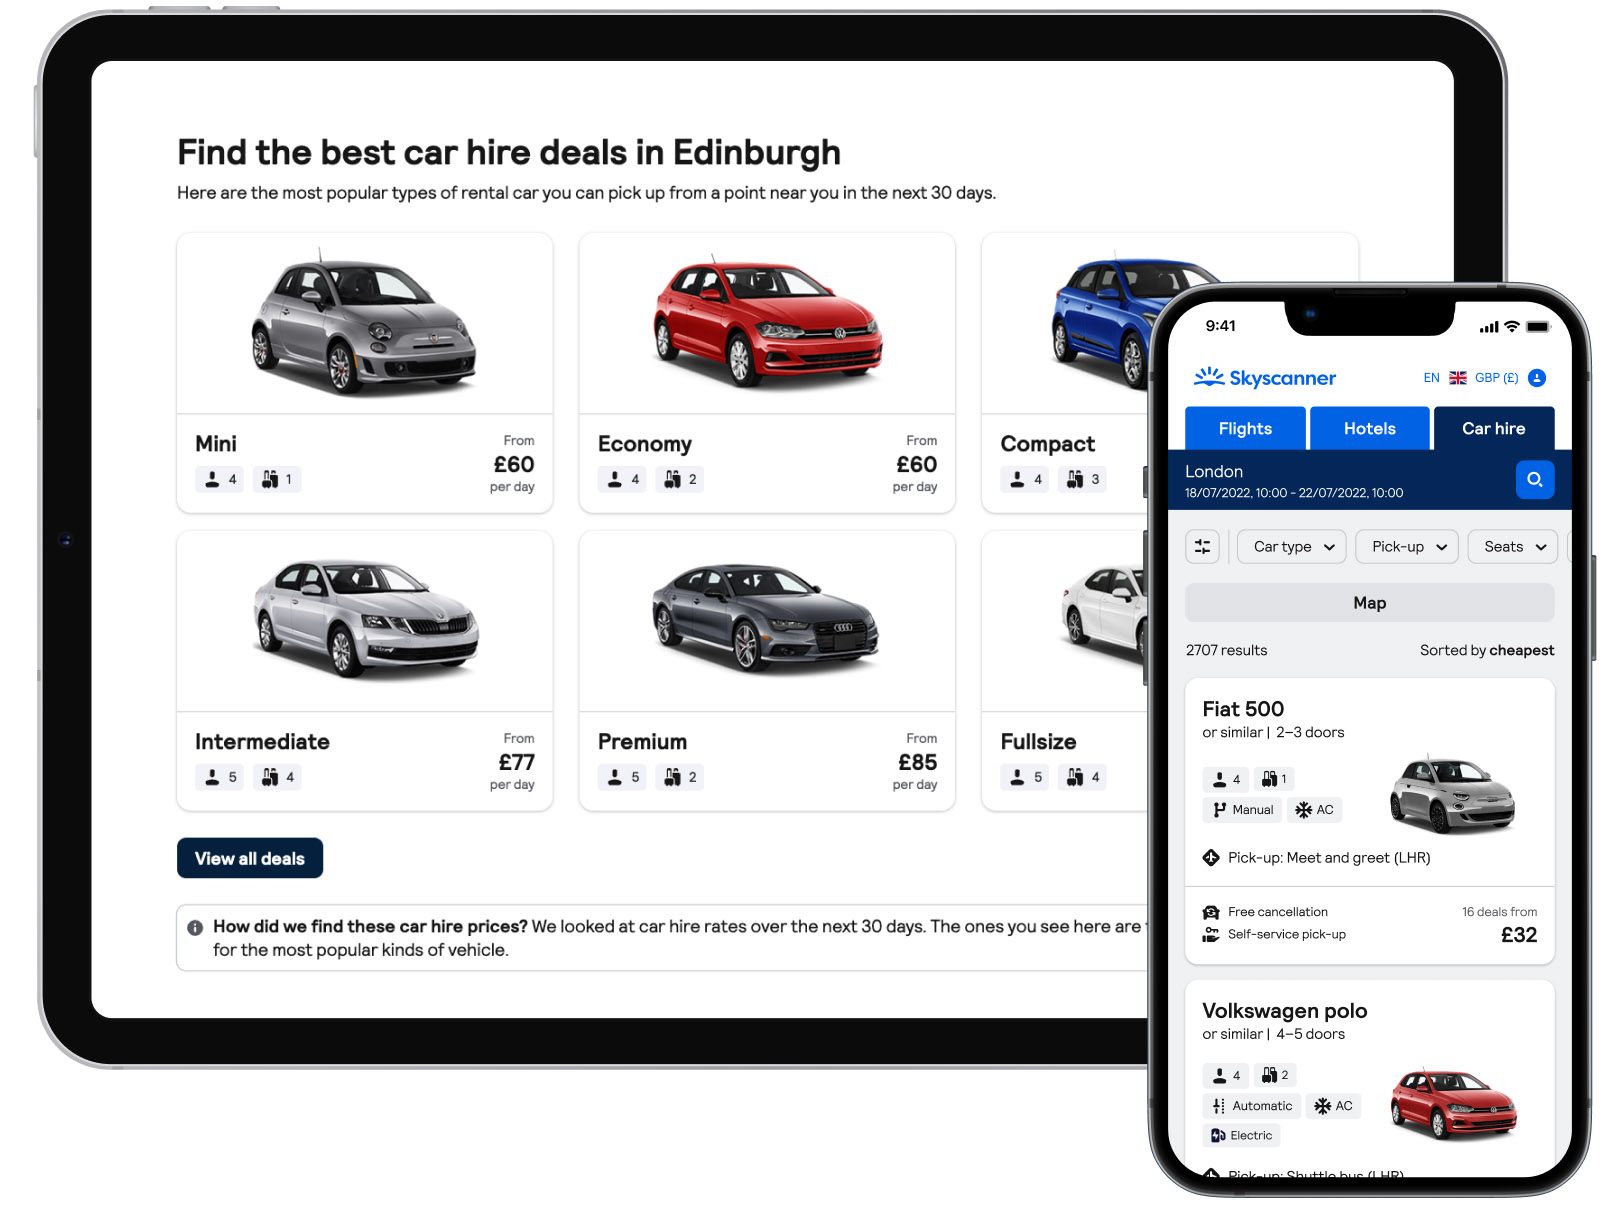 Industries-Car Hire-iPad and iPhone